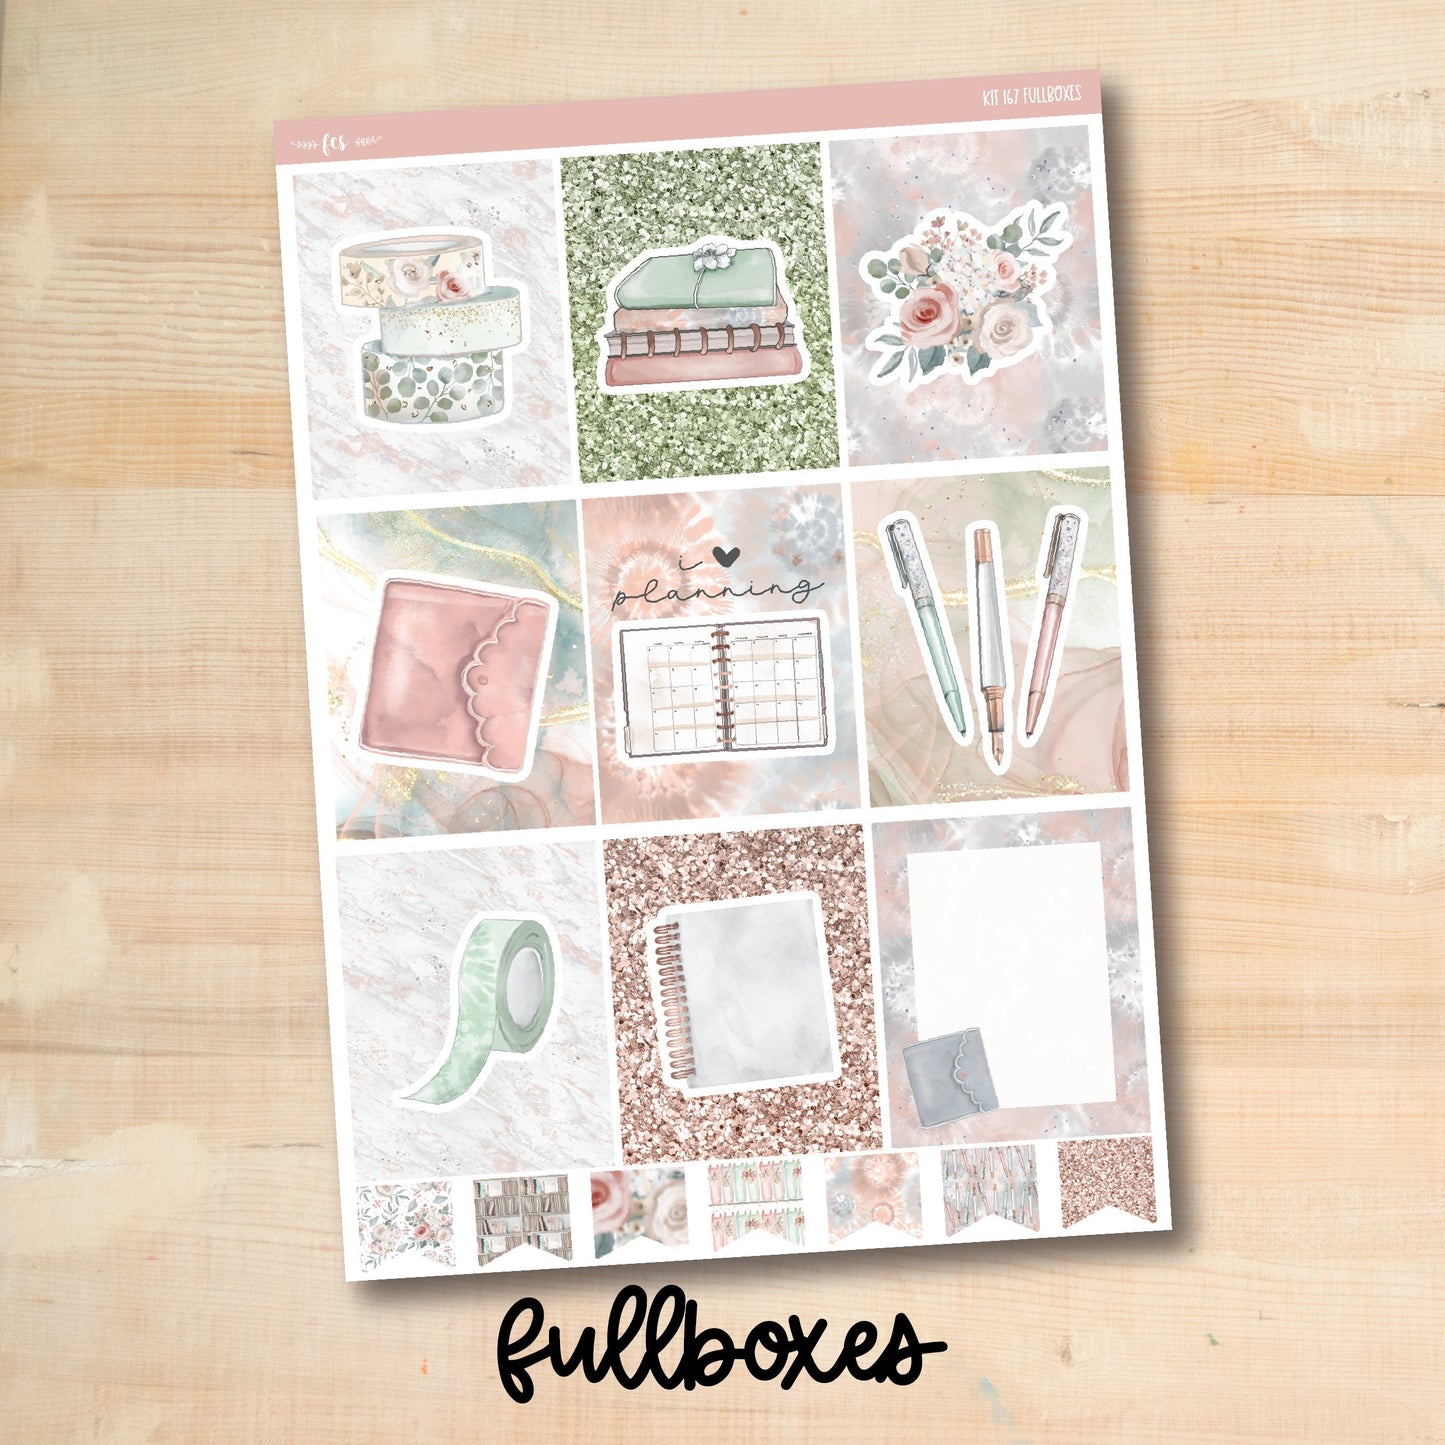 KIT-167 || PLANNER LIFE weekly planner kit for Erin Condren, Plum Paper, MakseLife and more!